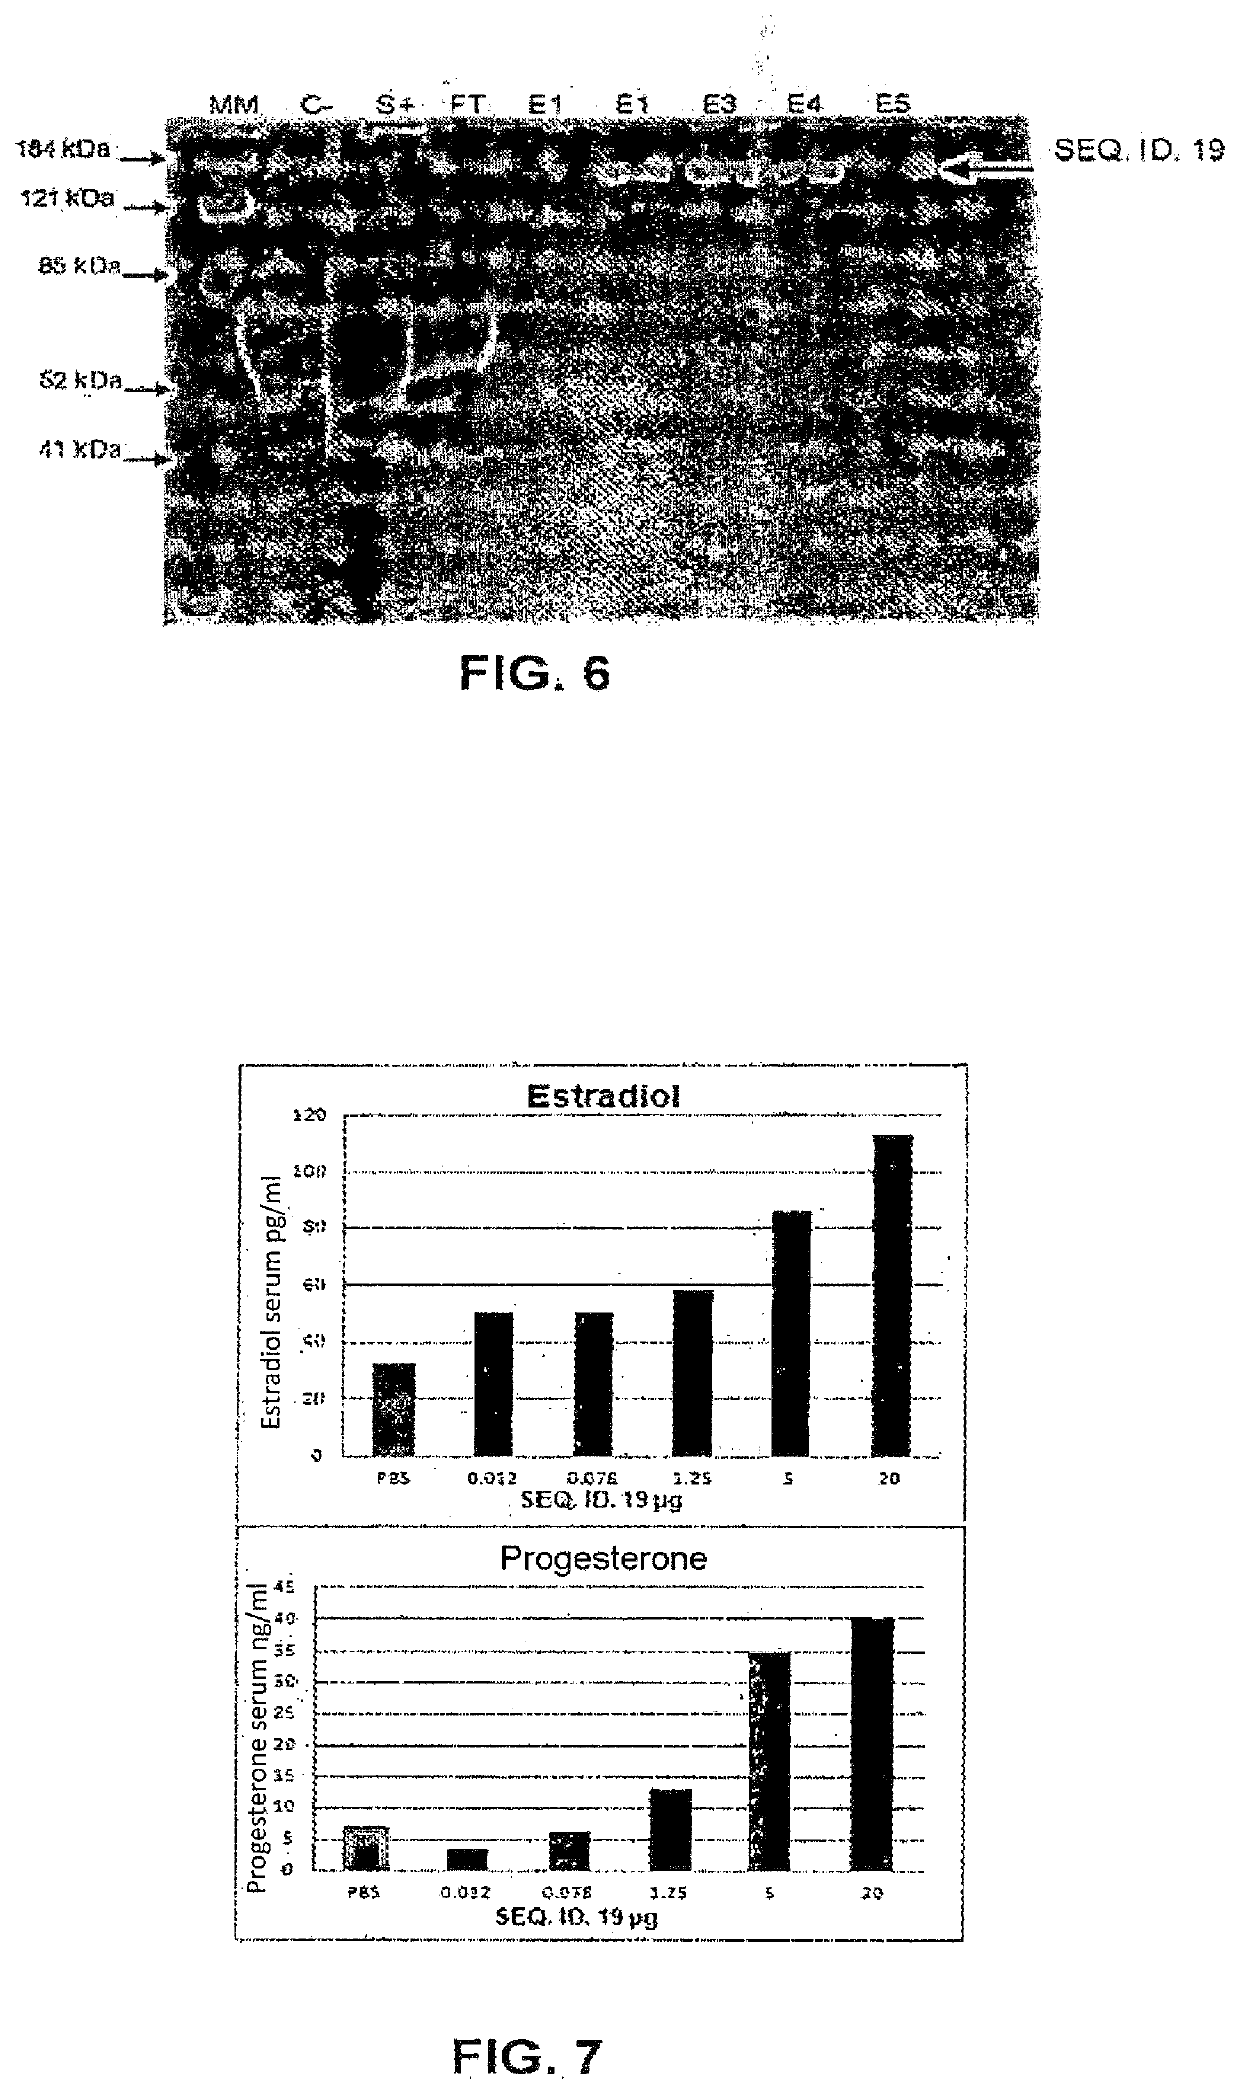 Method for producing and purifying hybrid or non-hybrid recombinant glycoprotein hormones, hybrid or non-hybrid recombinant glycoprotein hormones, expression vectors and uses of the recombinant glycoprotein hormones